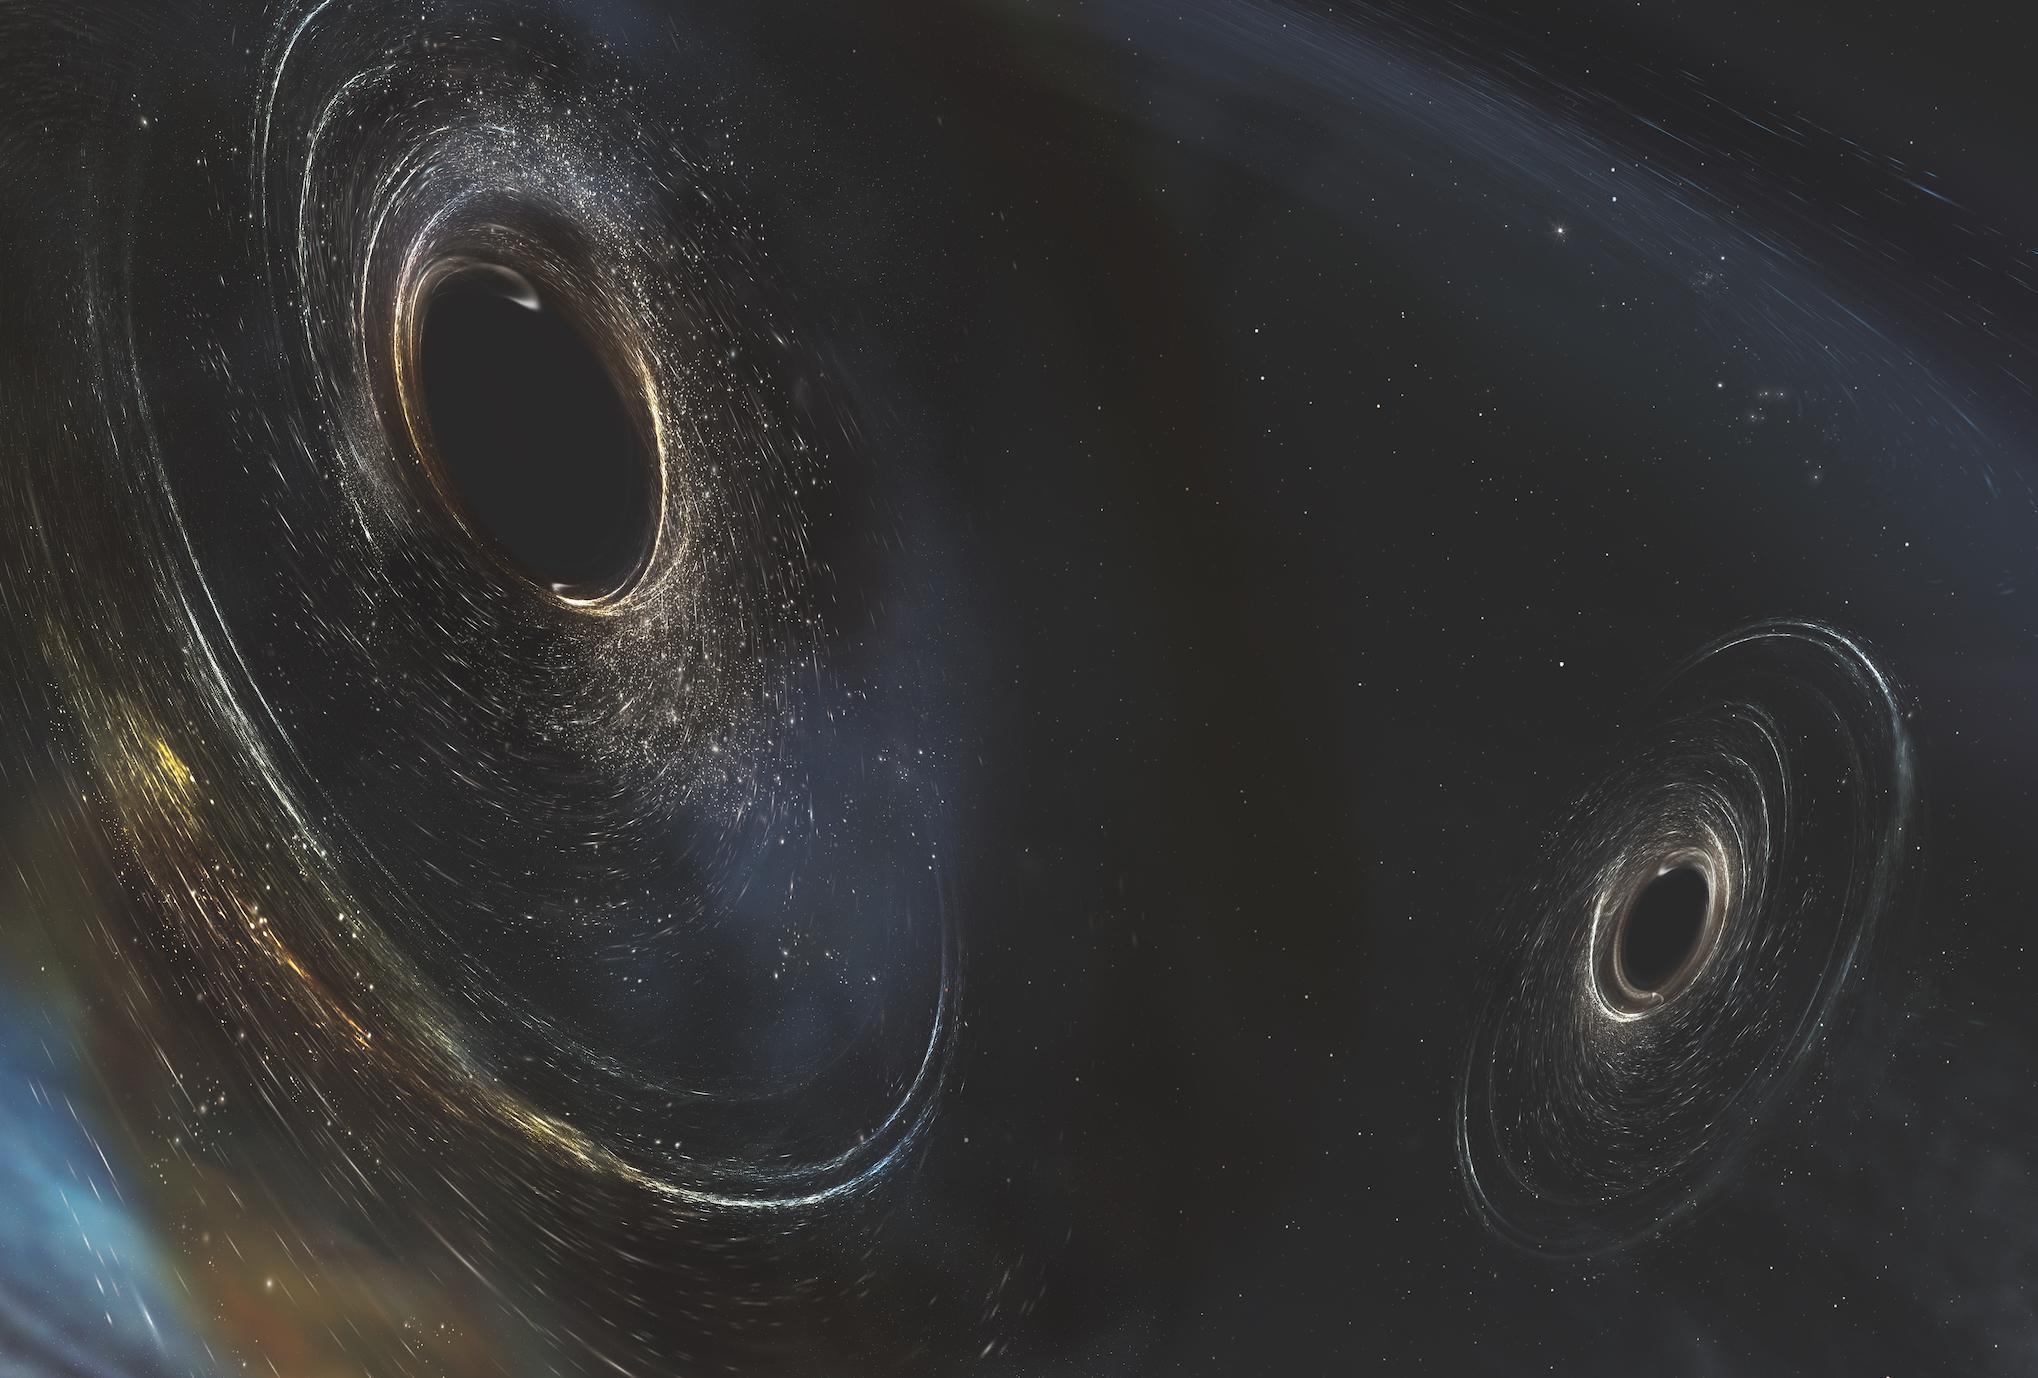 Artist's conception shows two merging black holes similar to those detected by LIGO. The black holes are spinning in a non-aligned fashion, which means they have different orientations relative to the overall orbital motion of the pair